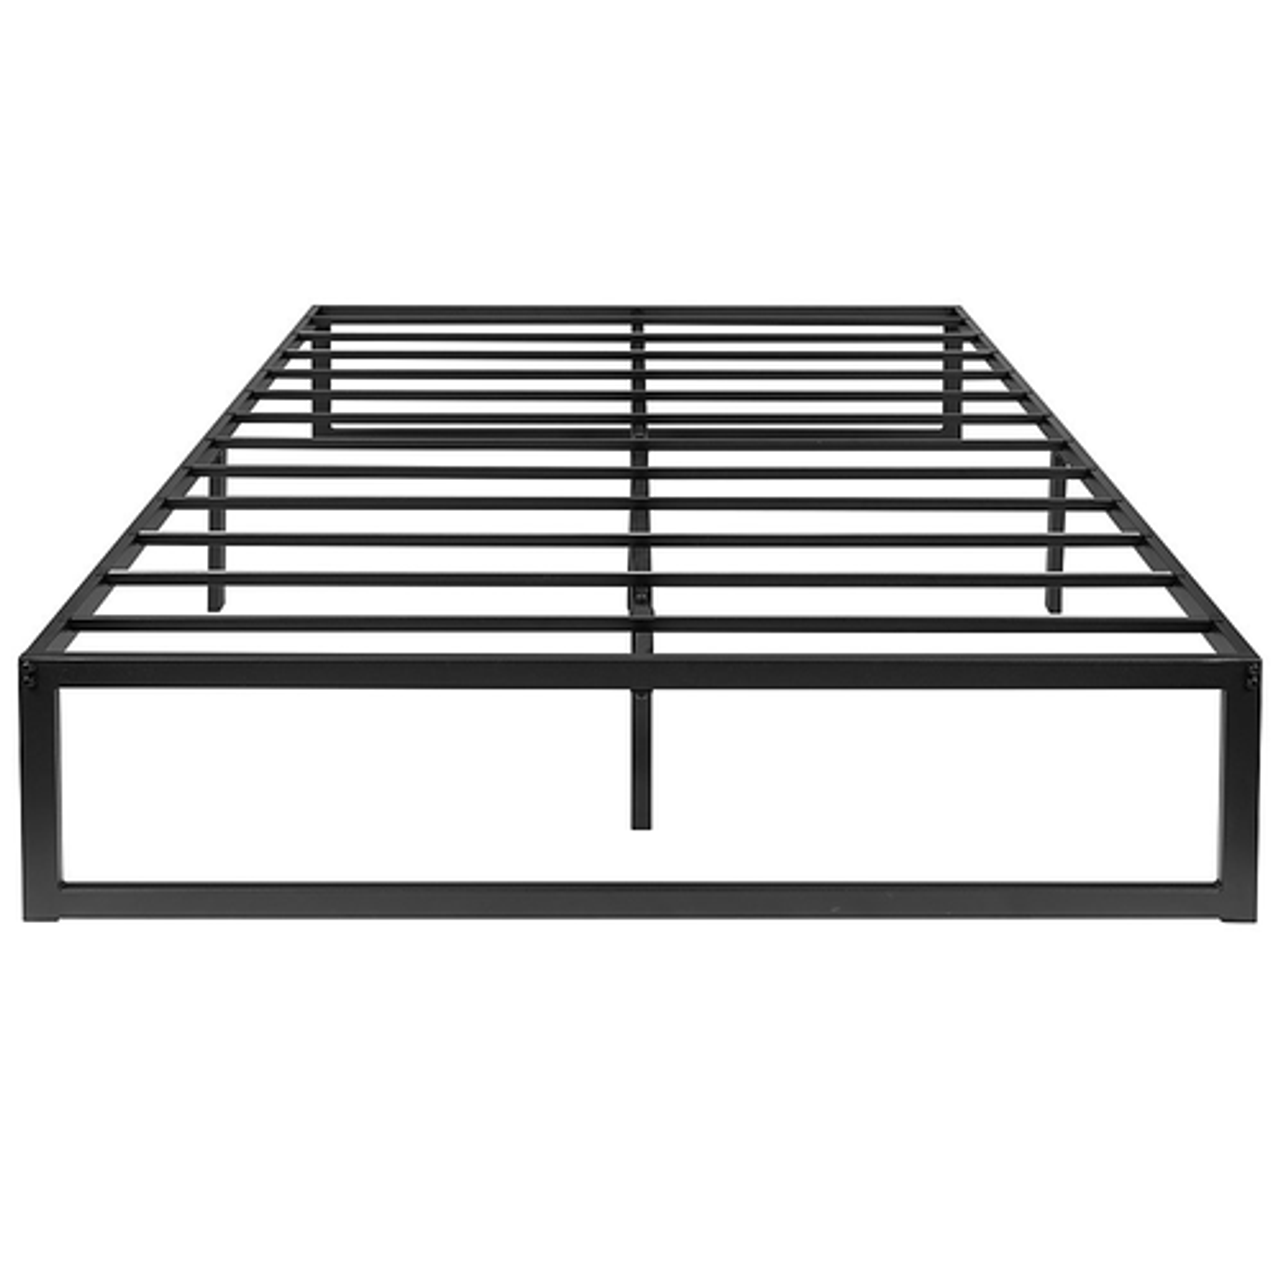 Flash Furniture - Universal 14 Inch Metal Platform Bed Frame - No Box Spring Needed w/ Steel Slat Support and Quick Lock Functionality - Black